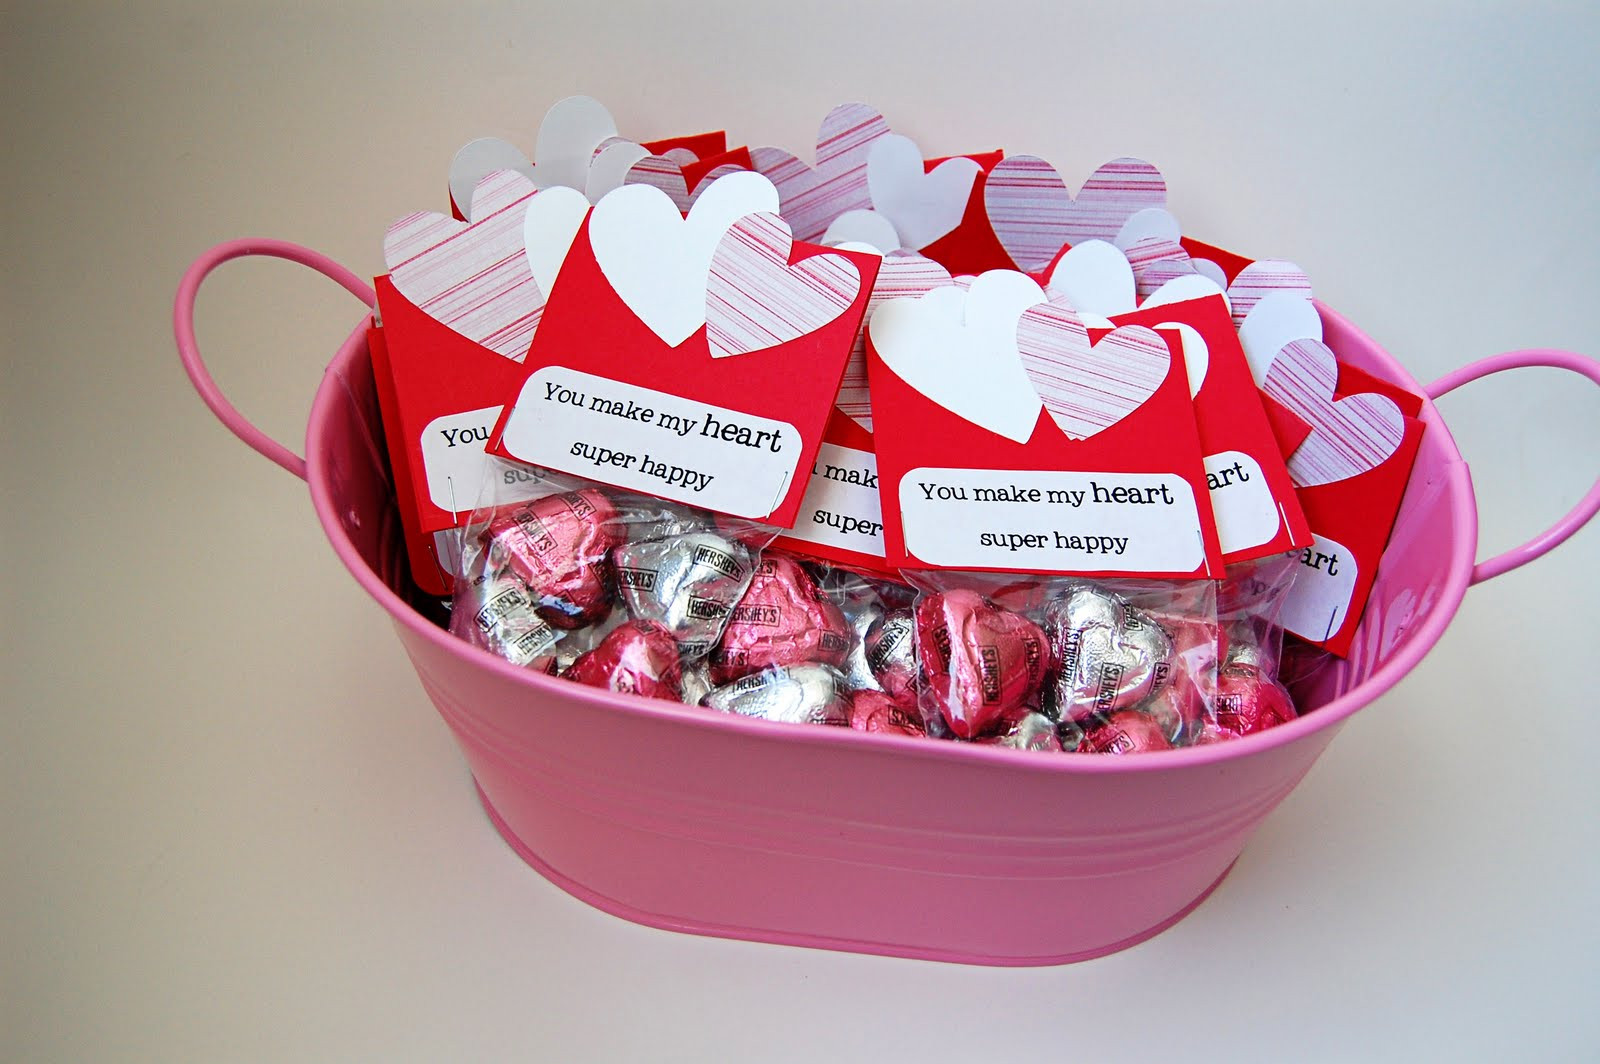 Homemade Valentines Day Gifts
 45 Homemade Valentines Day Gift Ideas For Him